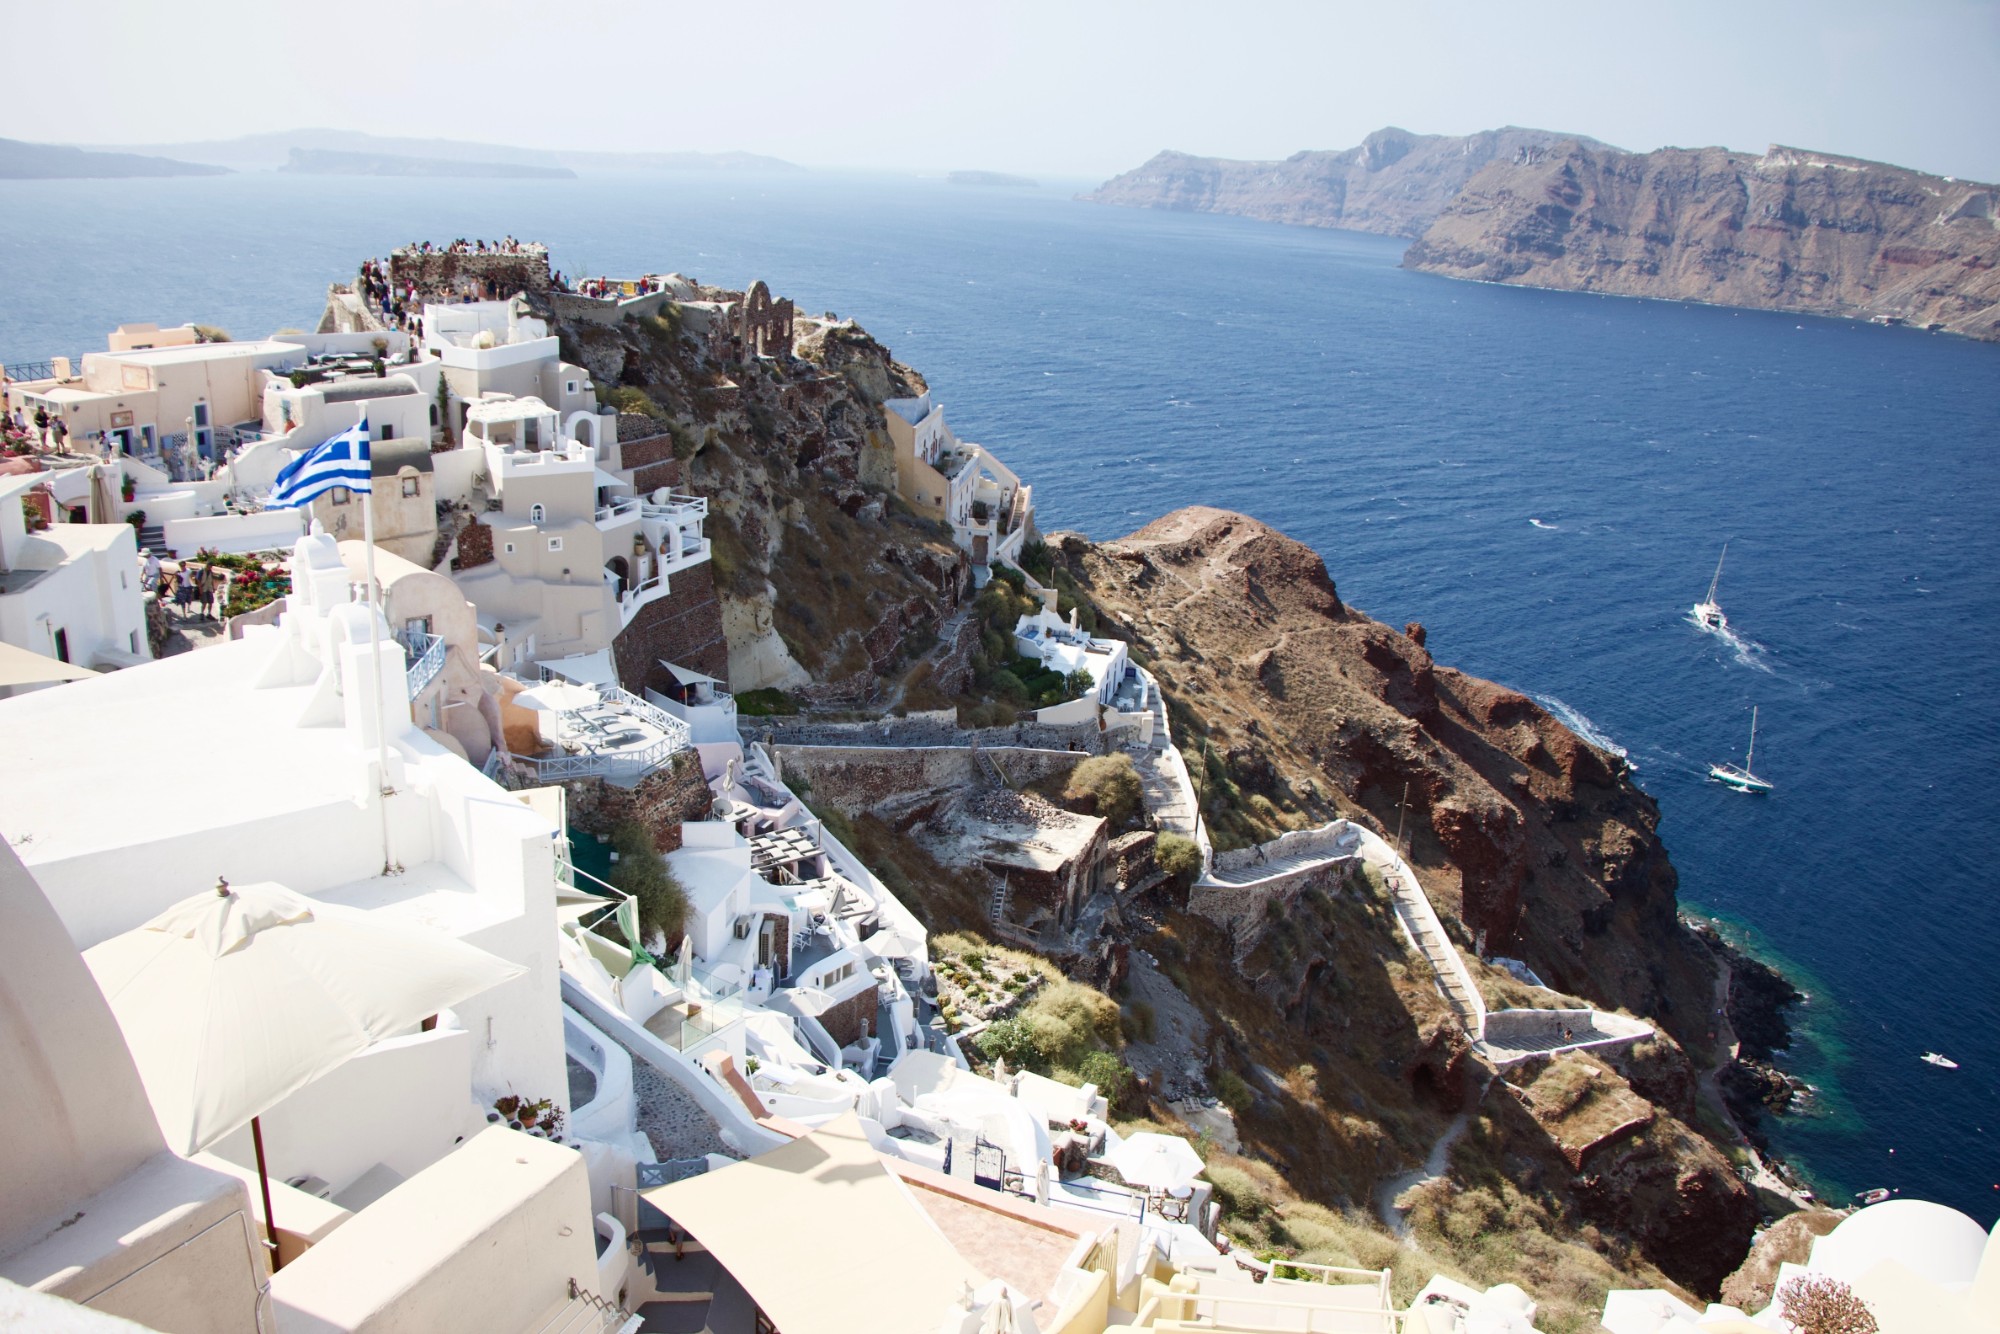 How much does it cost to visit Santorini